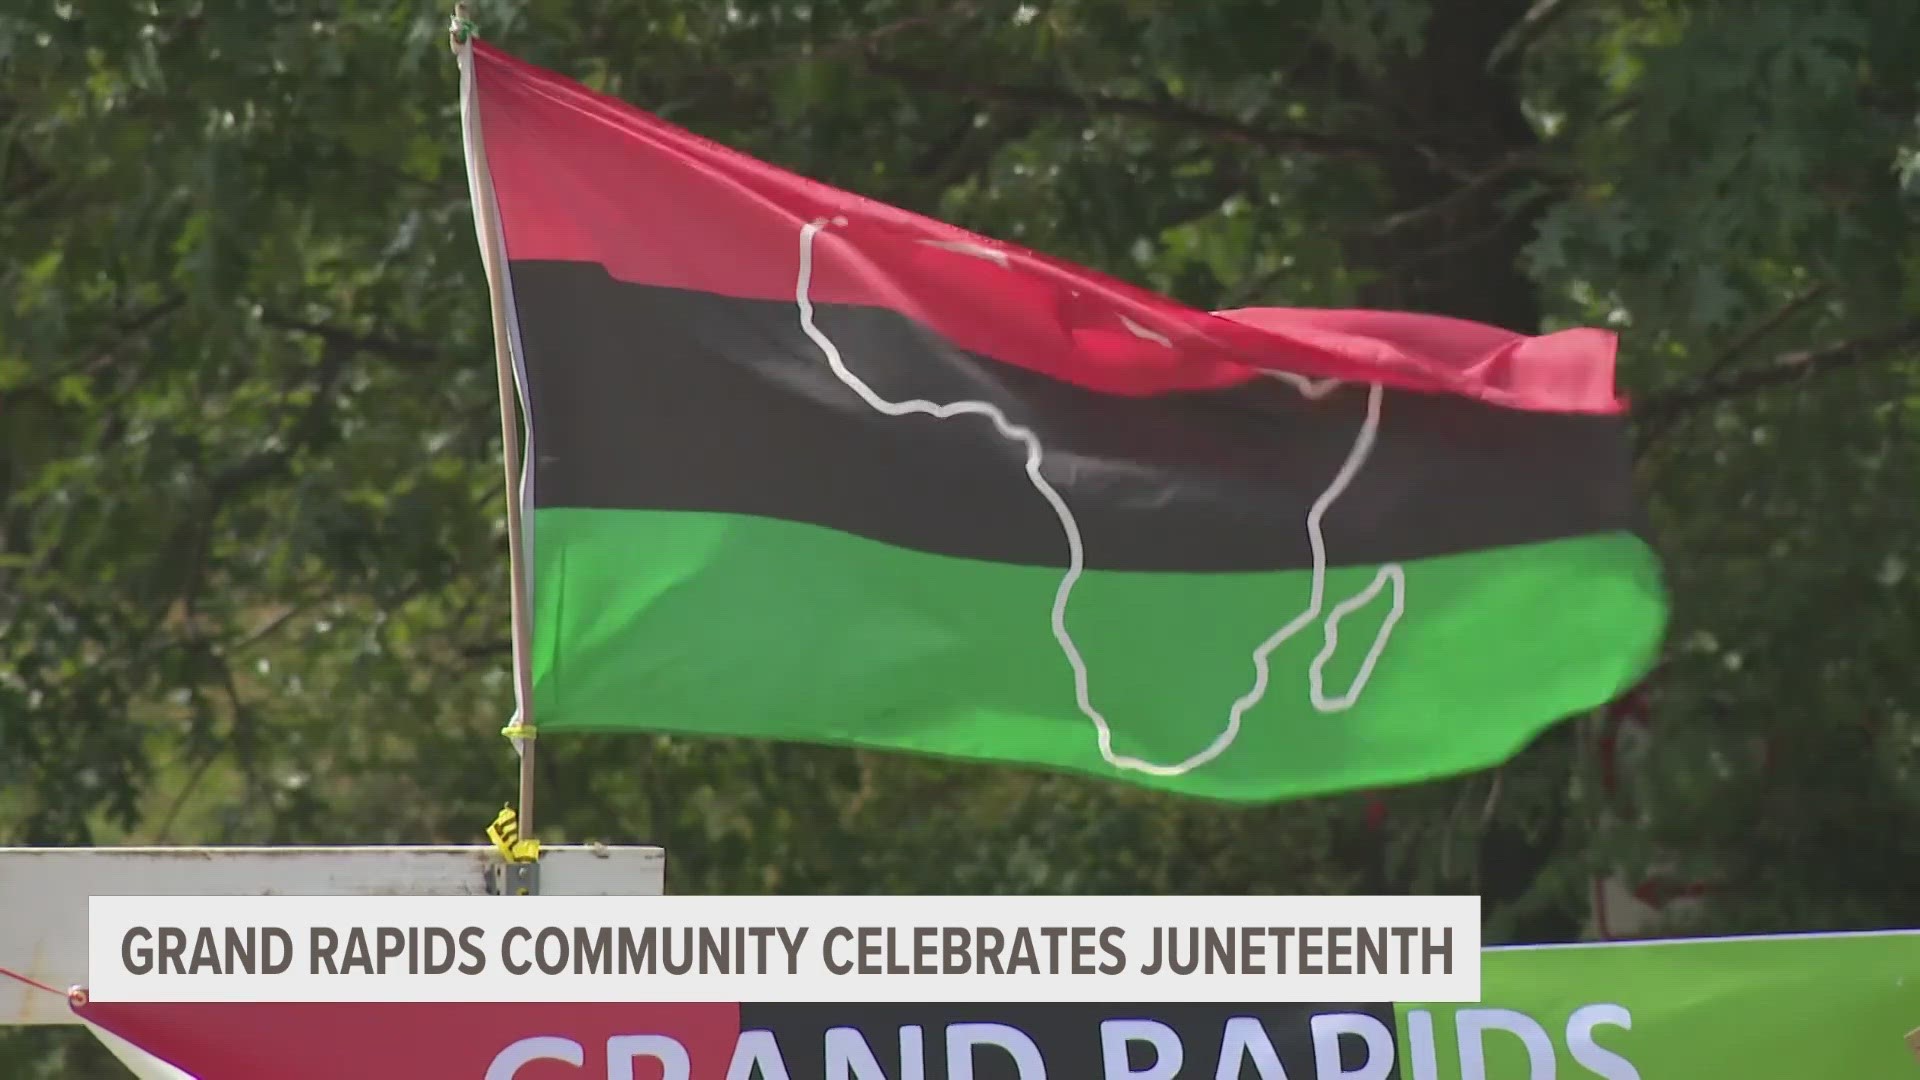 Grand Rapids community members marched to Dickinson Park to commemorate Juneteenth.